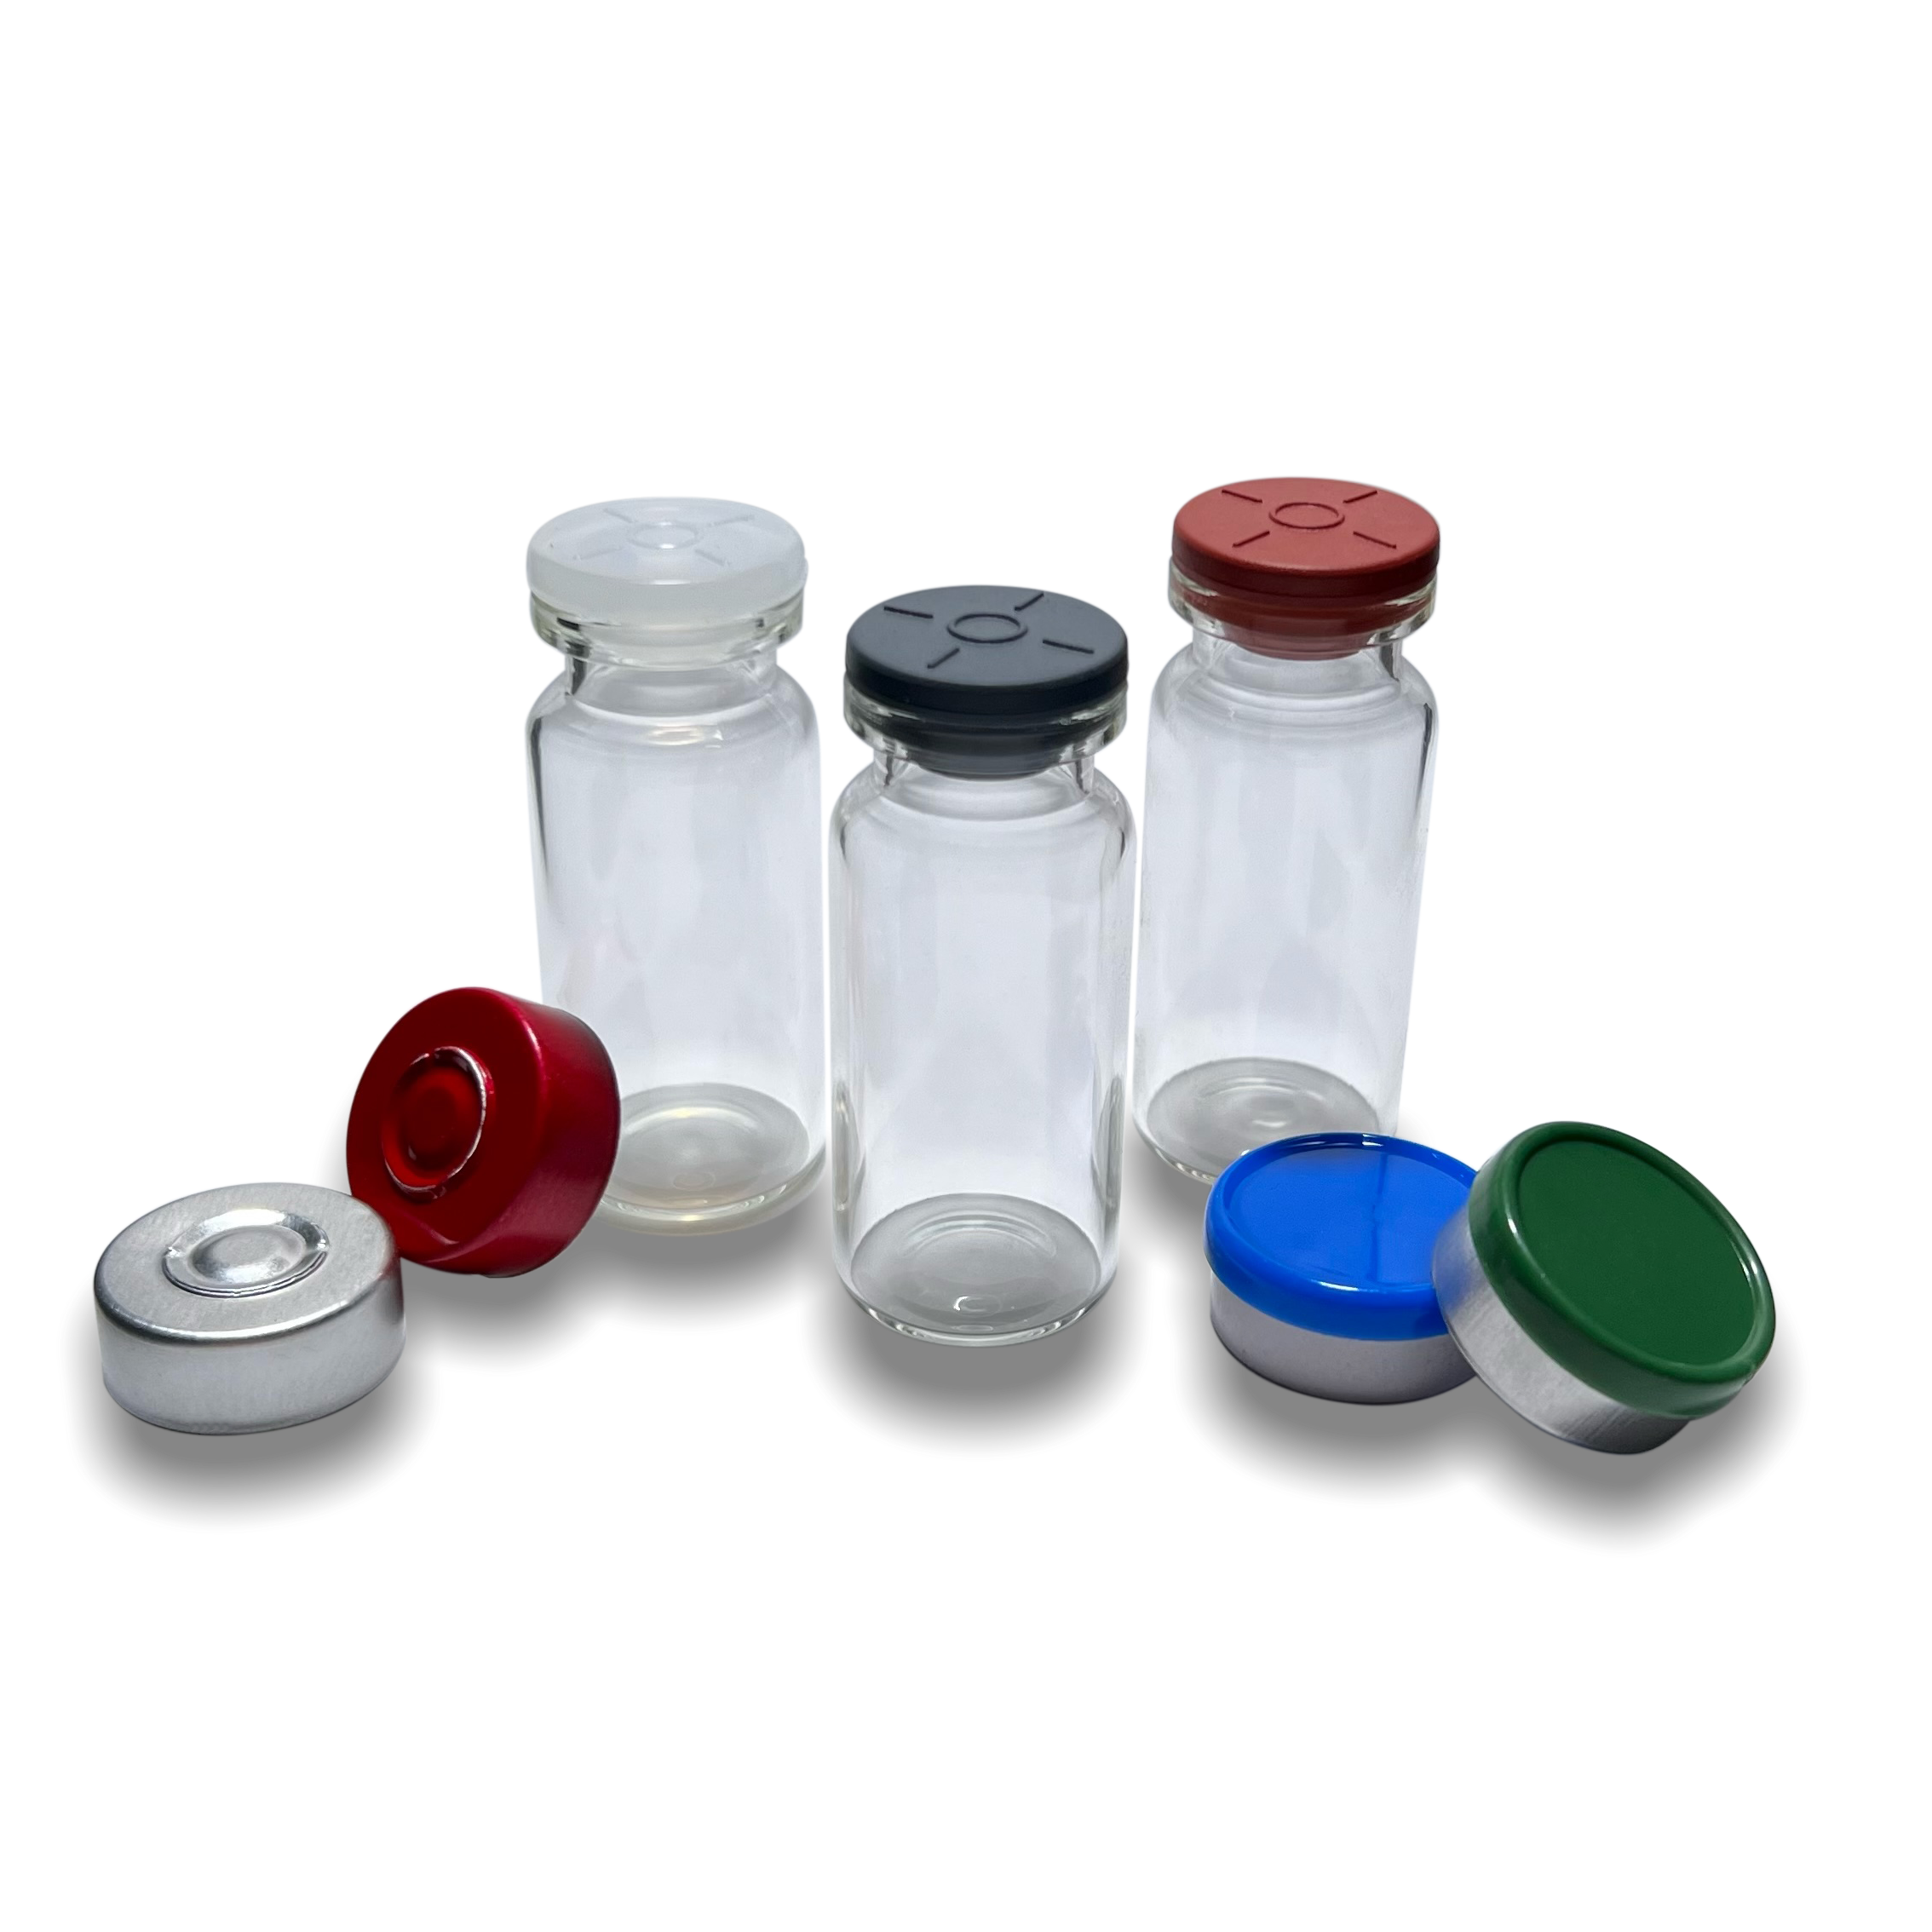 Lyophilisation Rubber Stopper, Sterile Vial Use Rubber Plugs